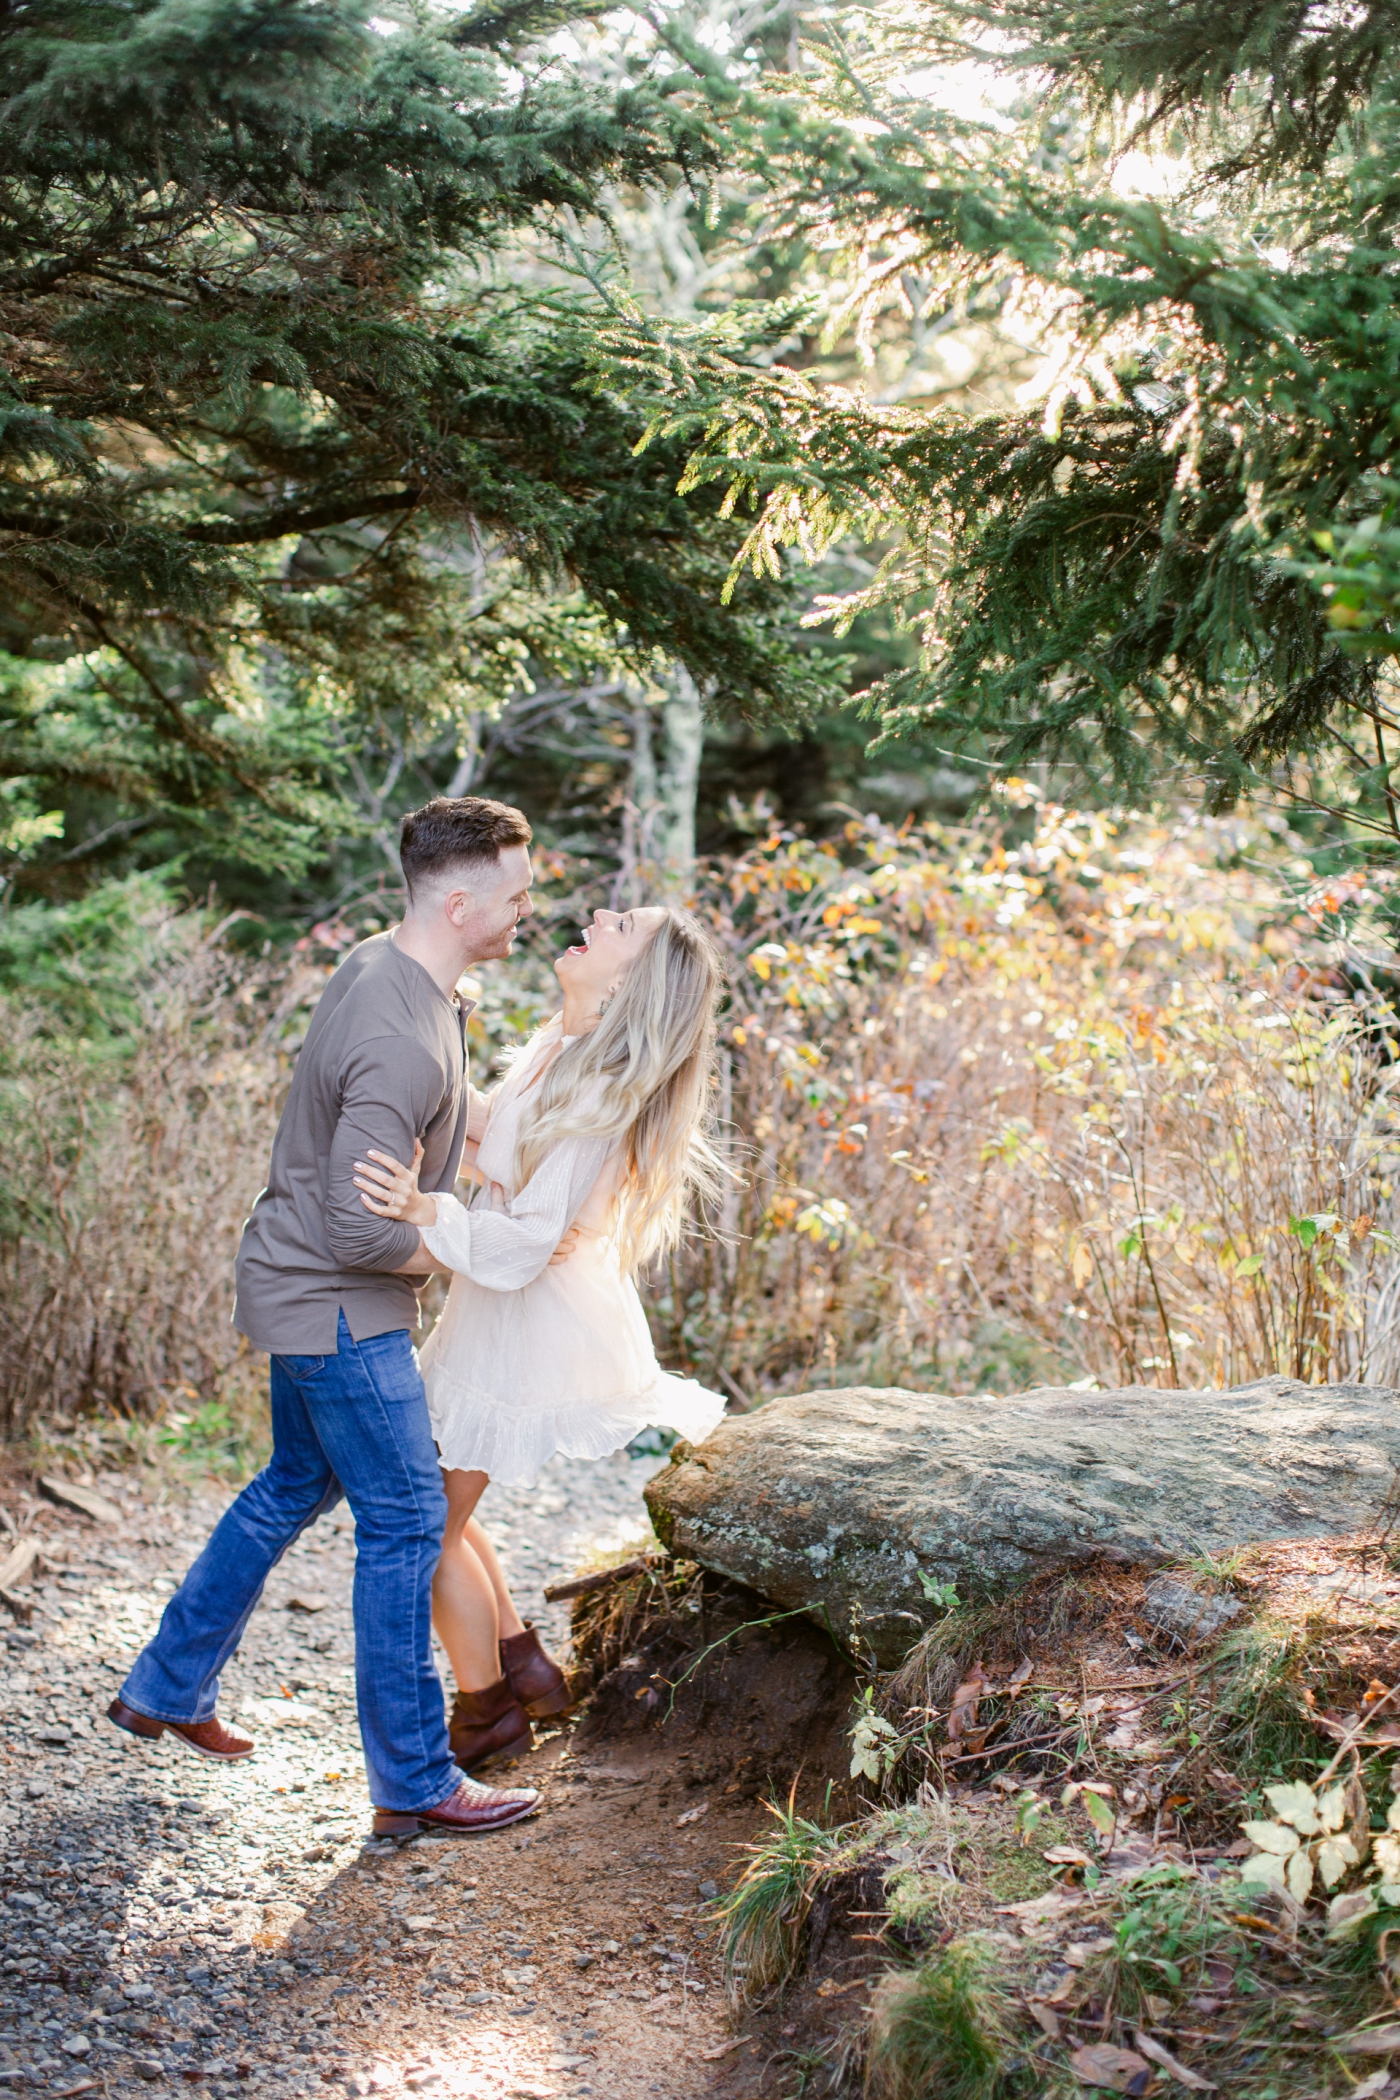 Asheville engagement session by Izzy + Co.Asheville engagement session by Izzy + Co.